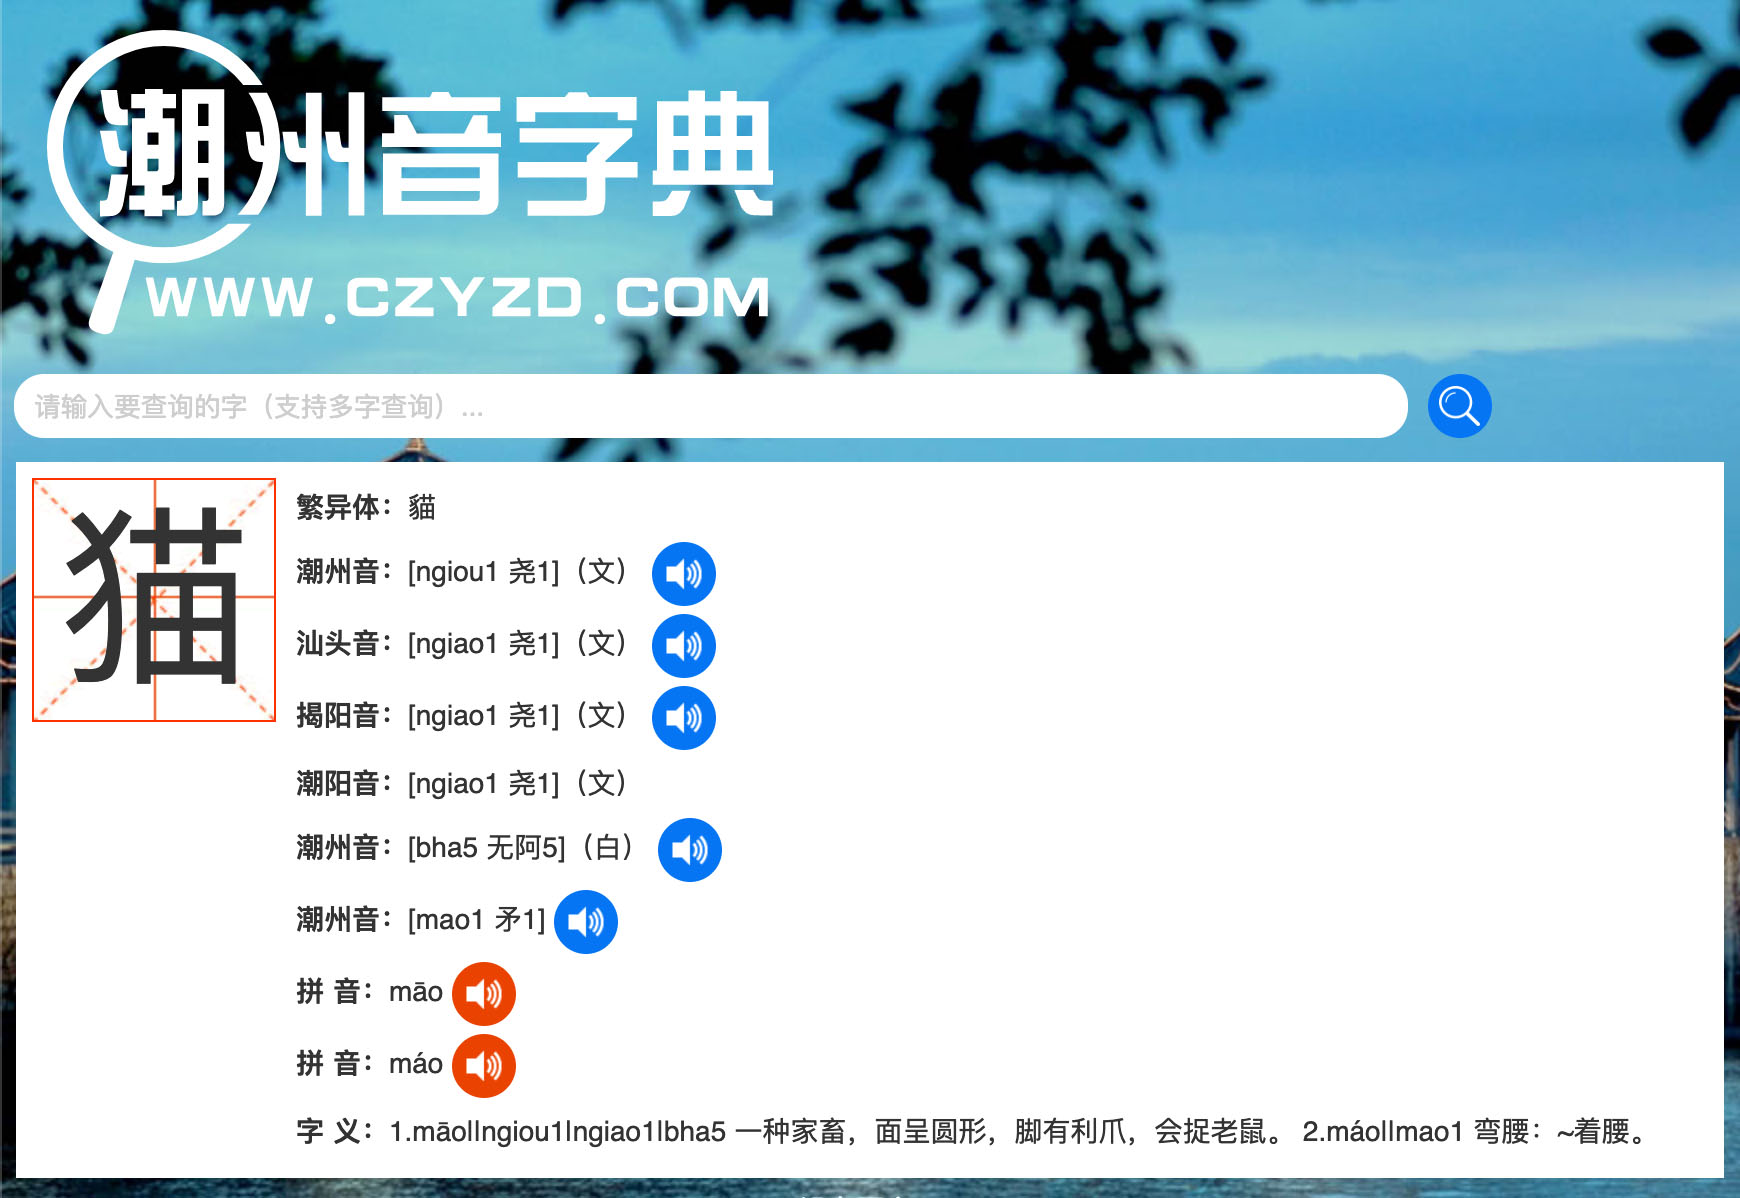 A screenshot of czyzd.com showing the definition of the Chinese character for cat. The site is more colorful than than mogher thanks to its leafy sky background image.